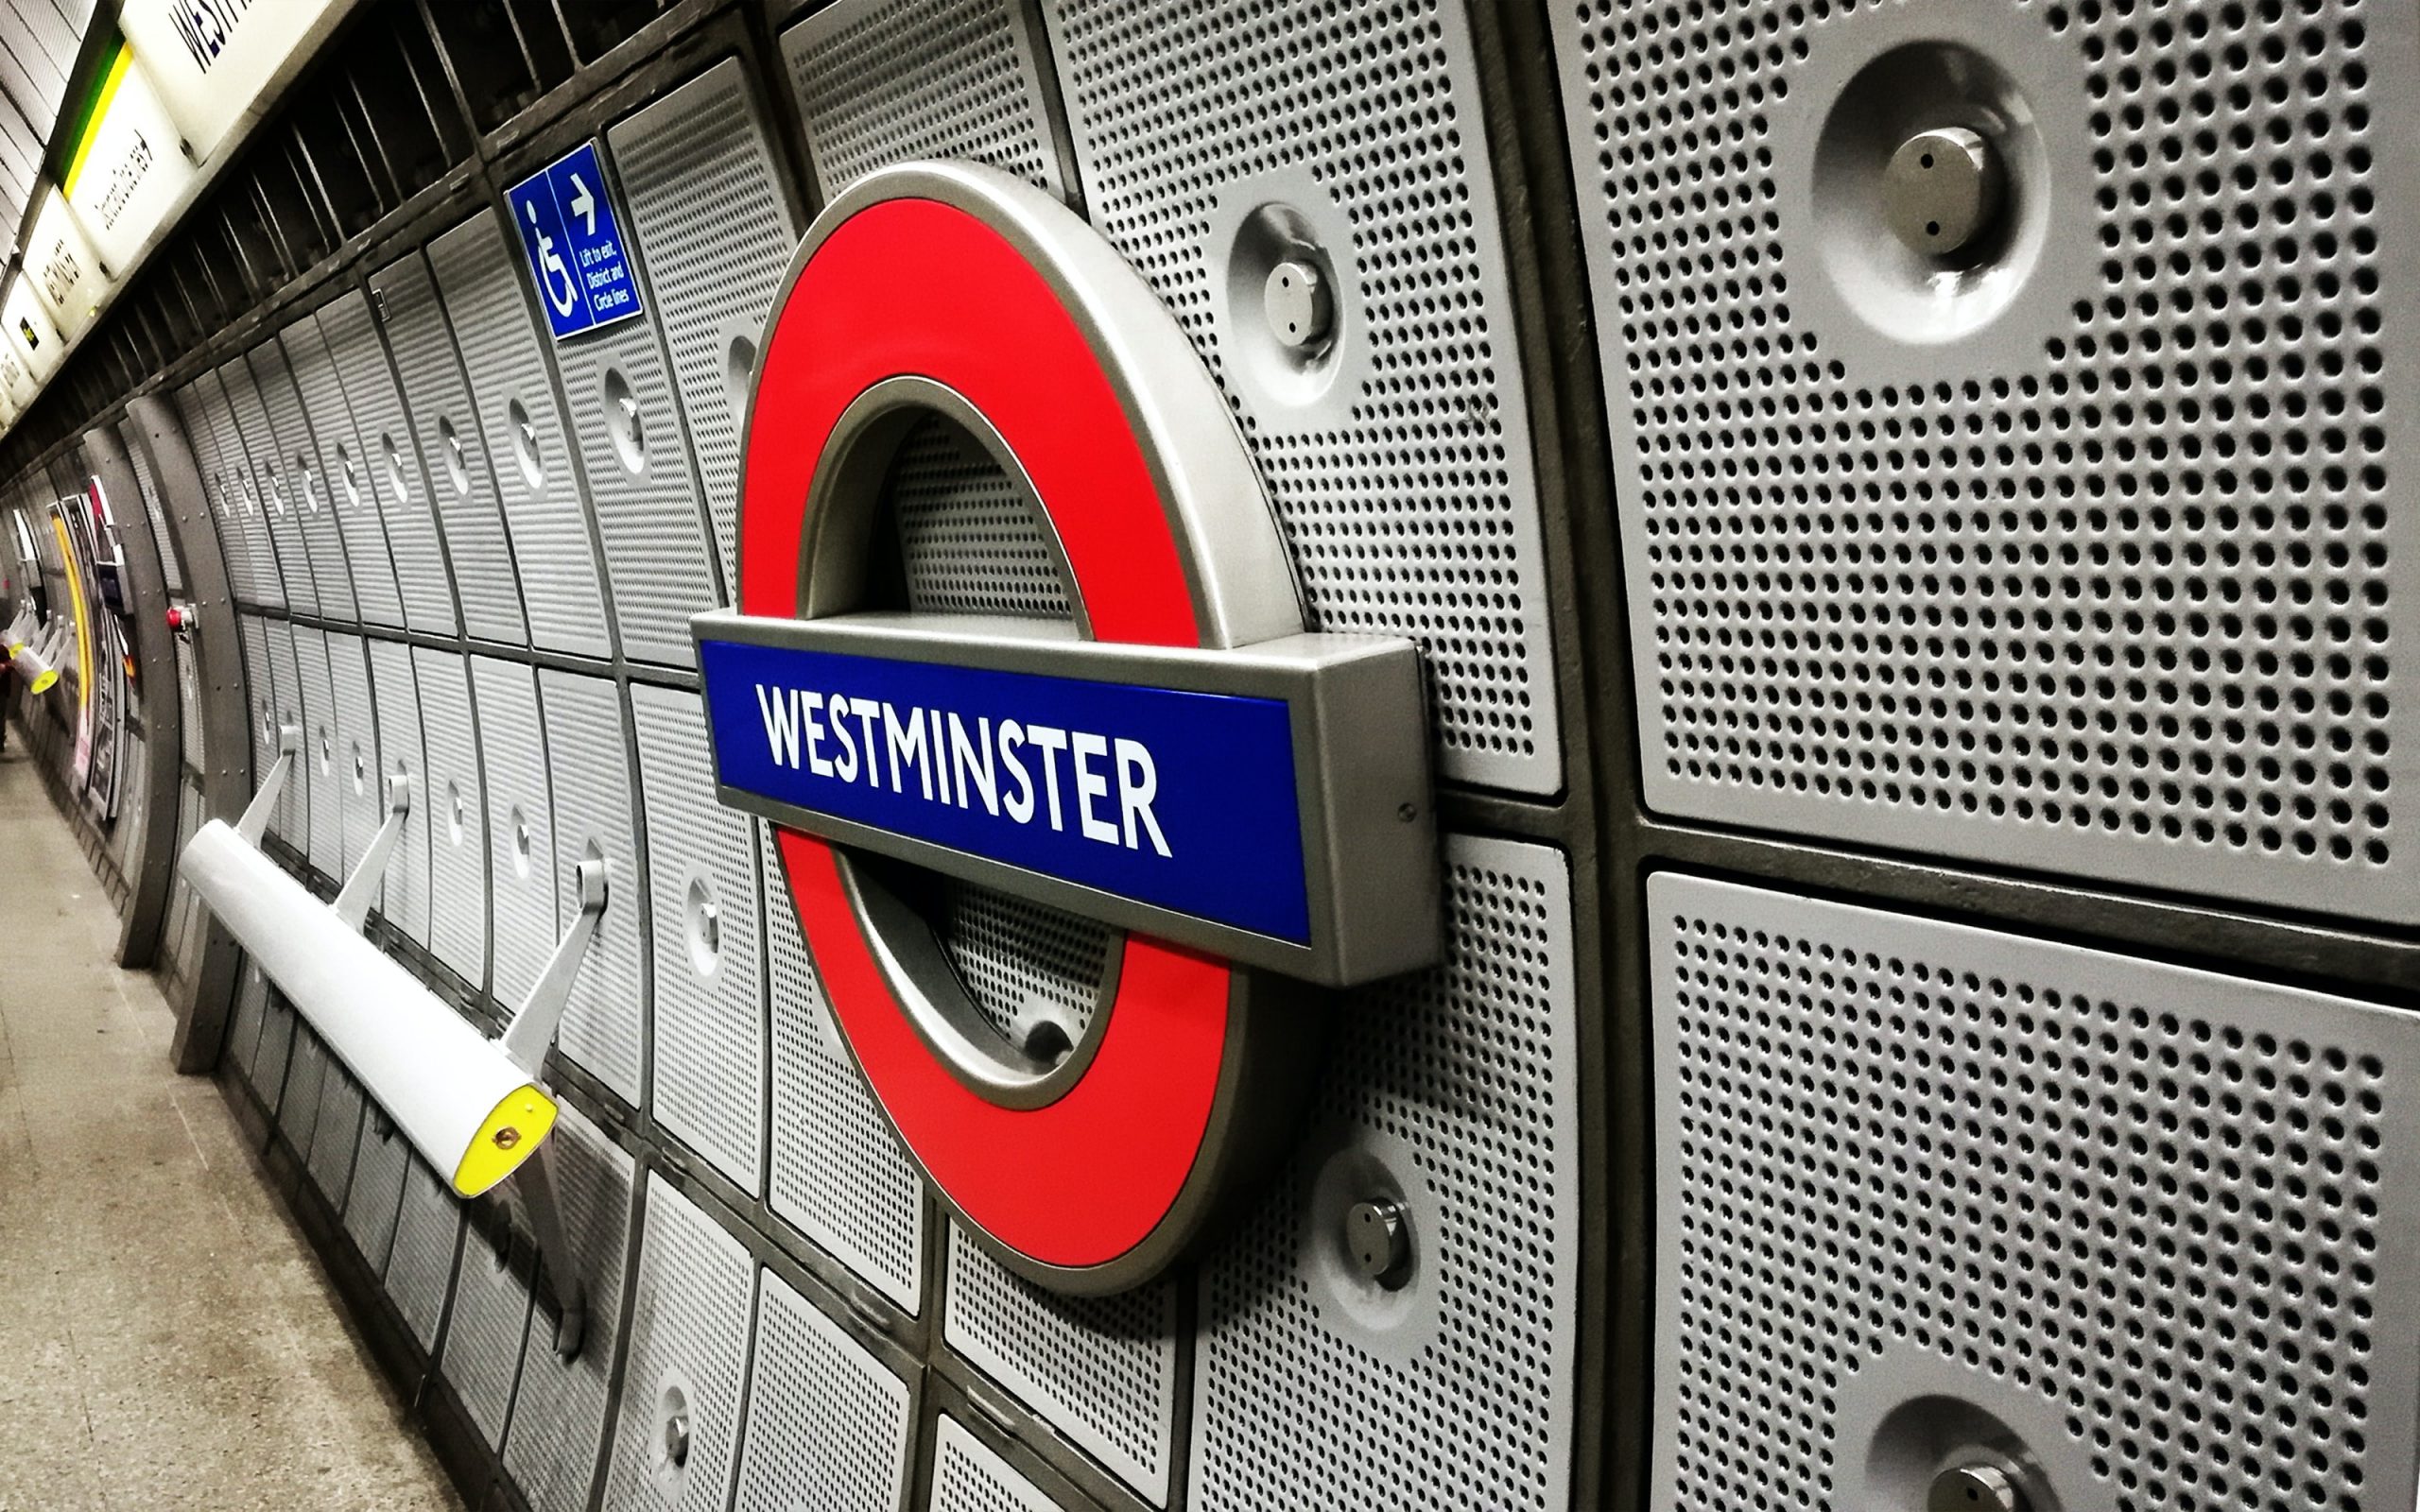 The photo shows the iconic roundel sign for Westminster station on the London Underground. The sign, with its bold red circle and blue bar bearing the station name in white lettering, is mounted on a textured, perforated metal wall characteristic of many tube stations. The perspective of the image leads down the platform, with the curvature of the tunnel visible in the distance, and a few passengers are present further along the platform.